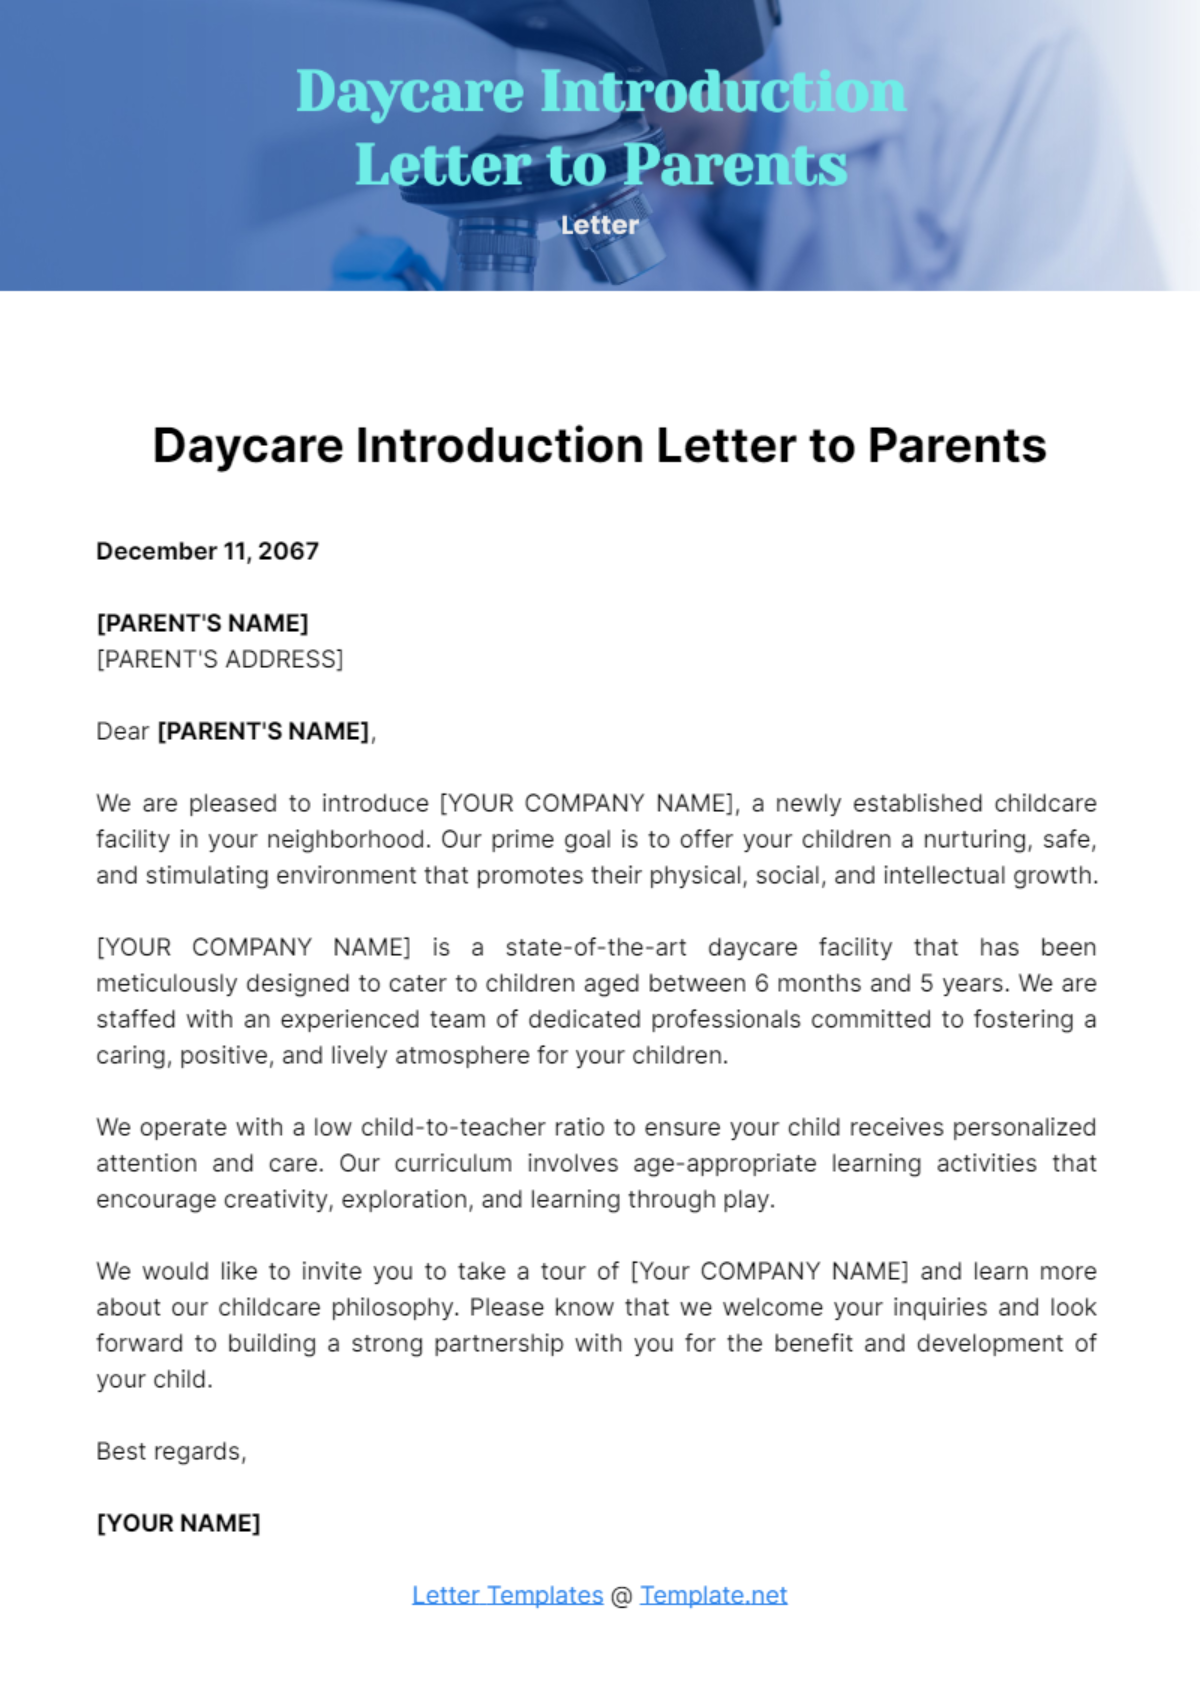 Free Daycare Introduction Letter to Parents Template